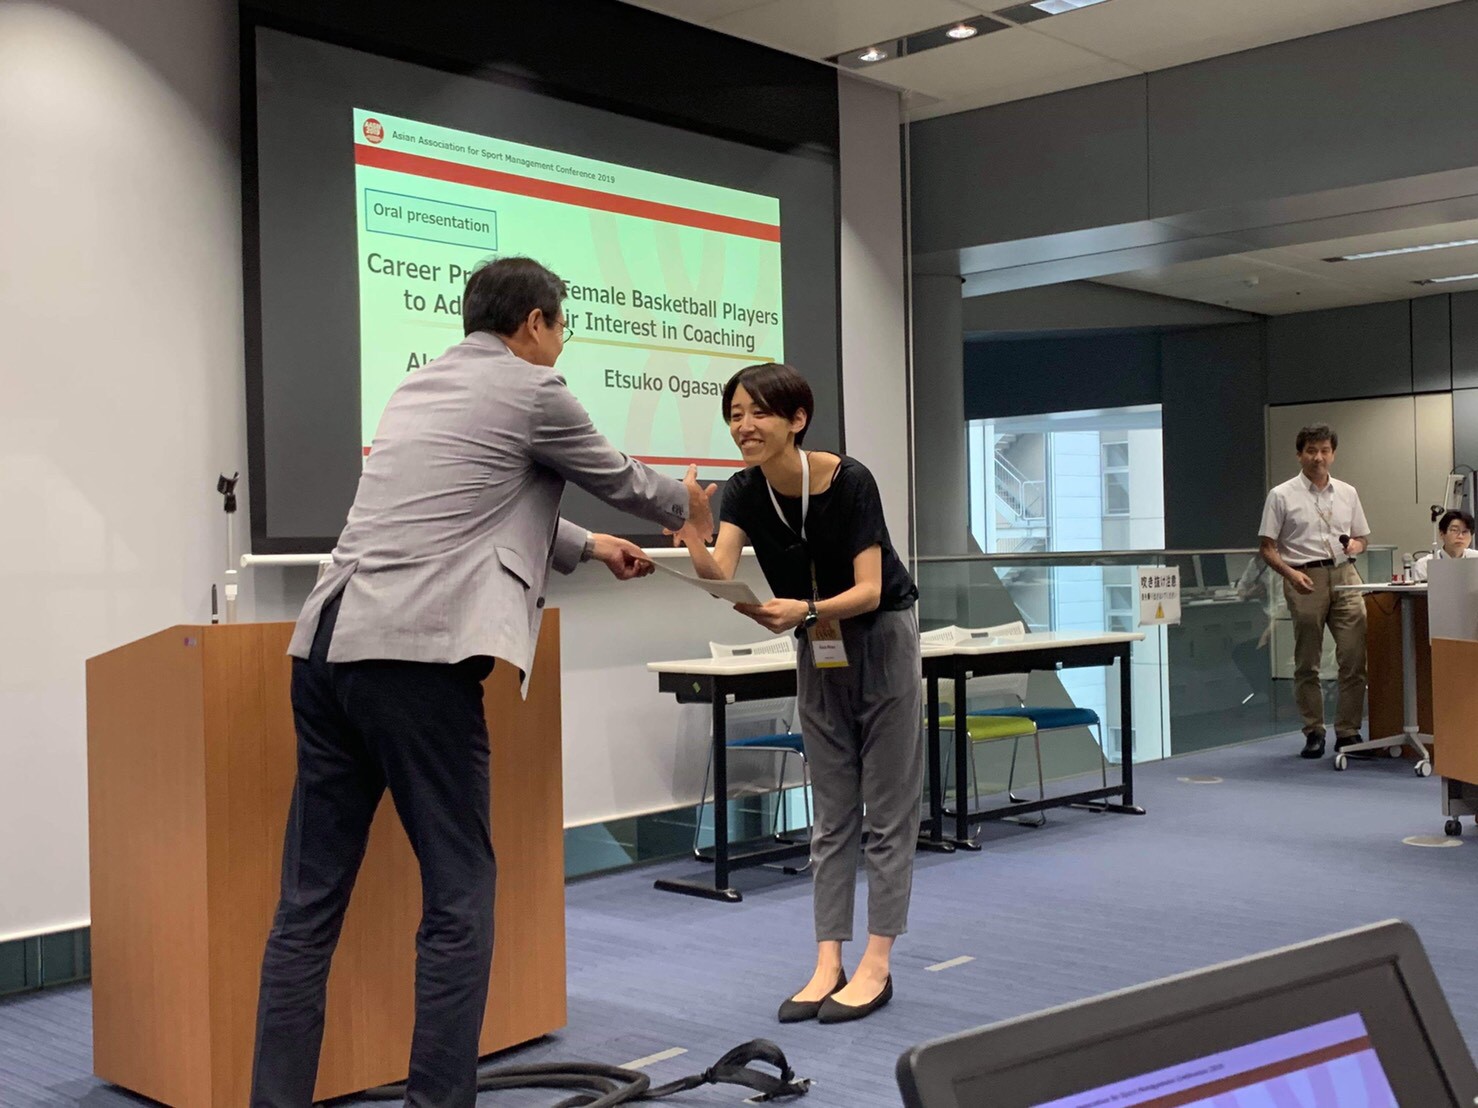 Awarded the “Outstanding Abstract Award” at the “AASM2019 Conference”!